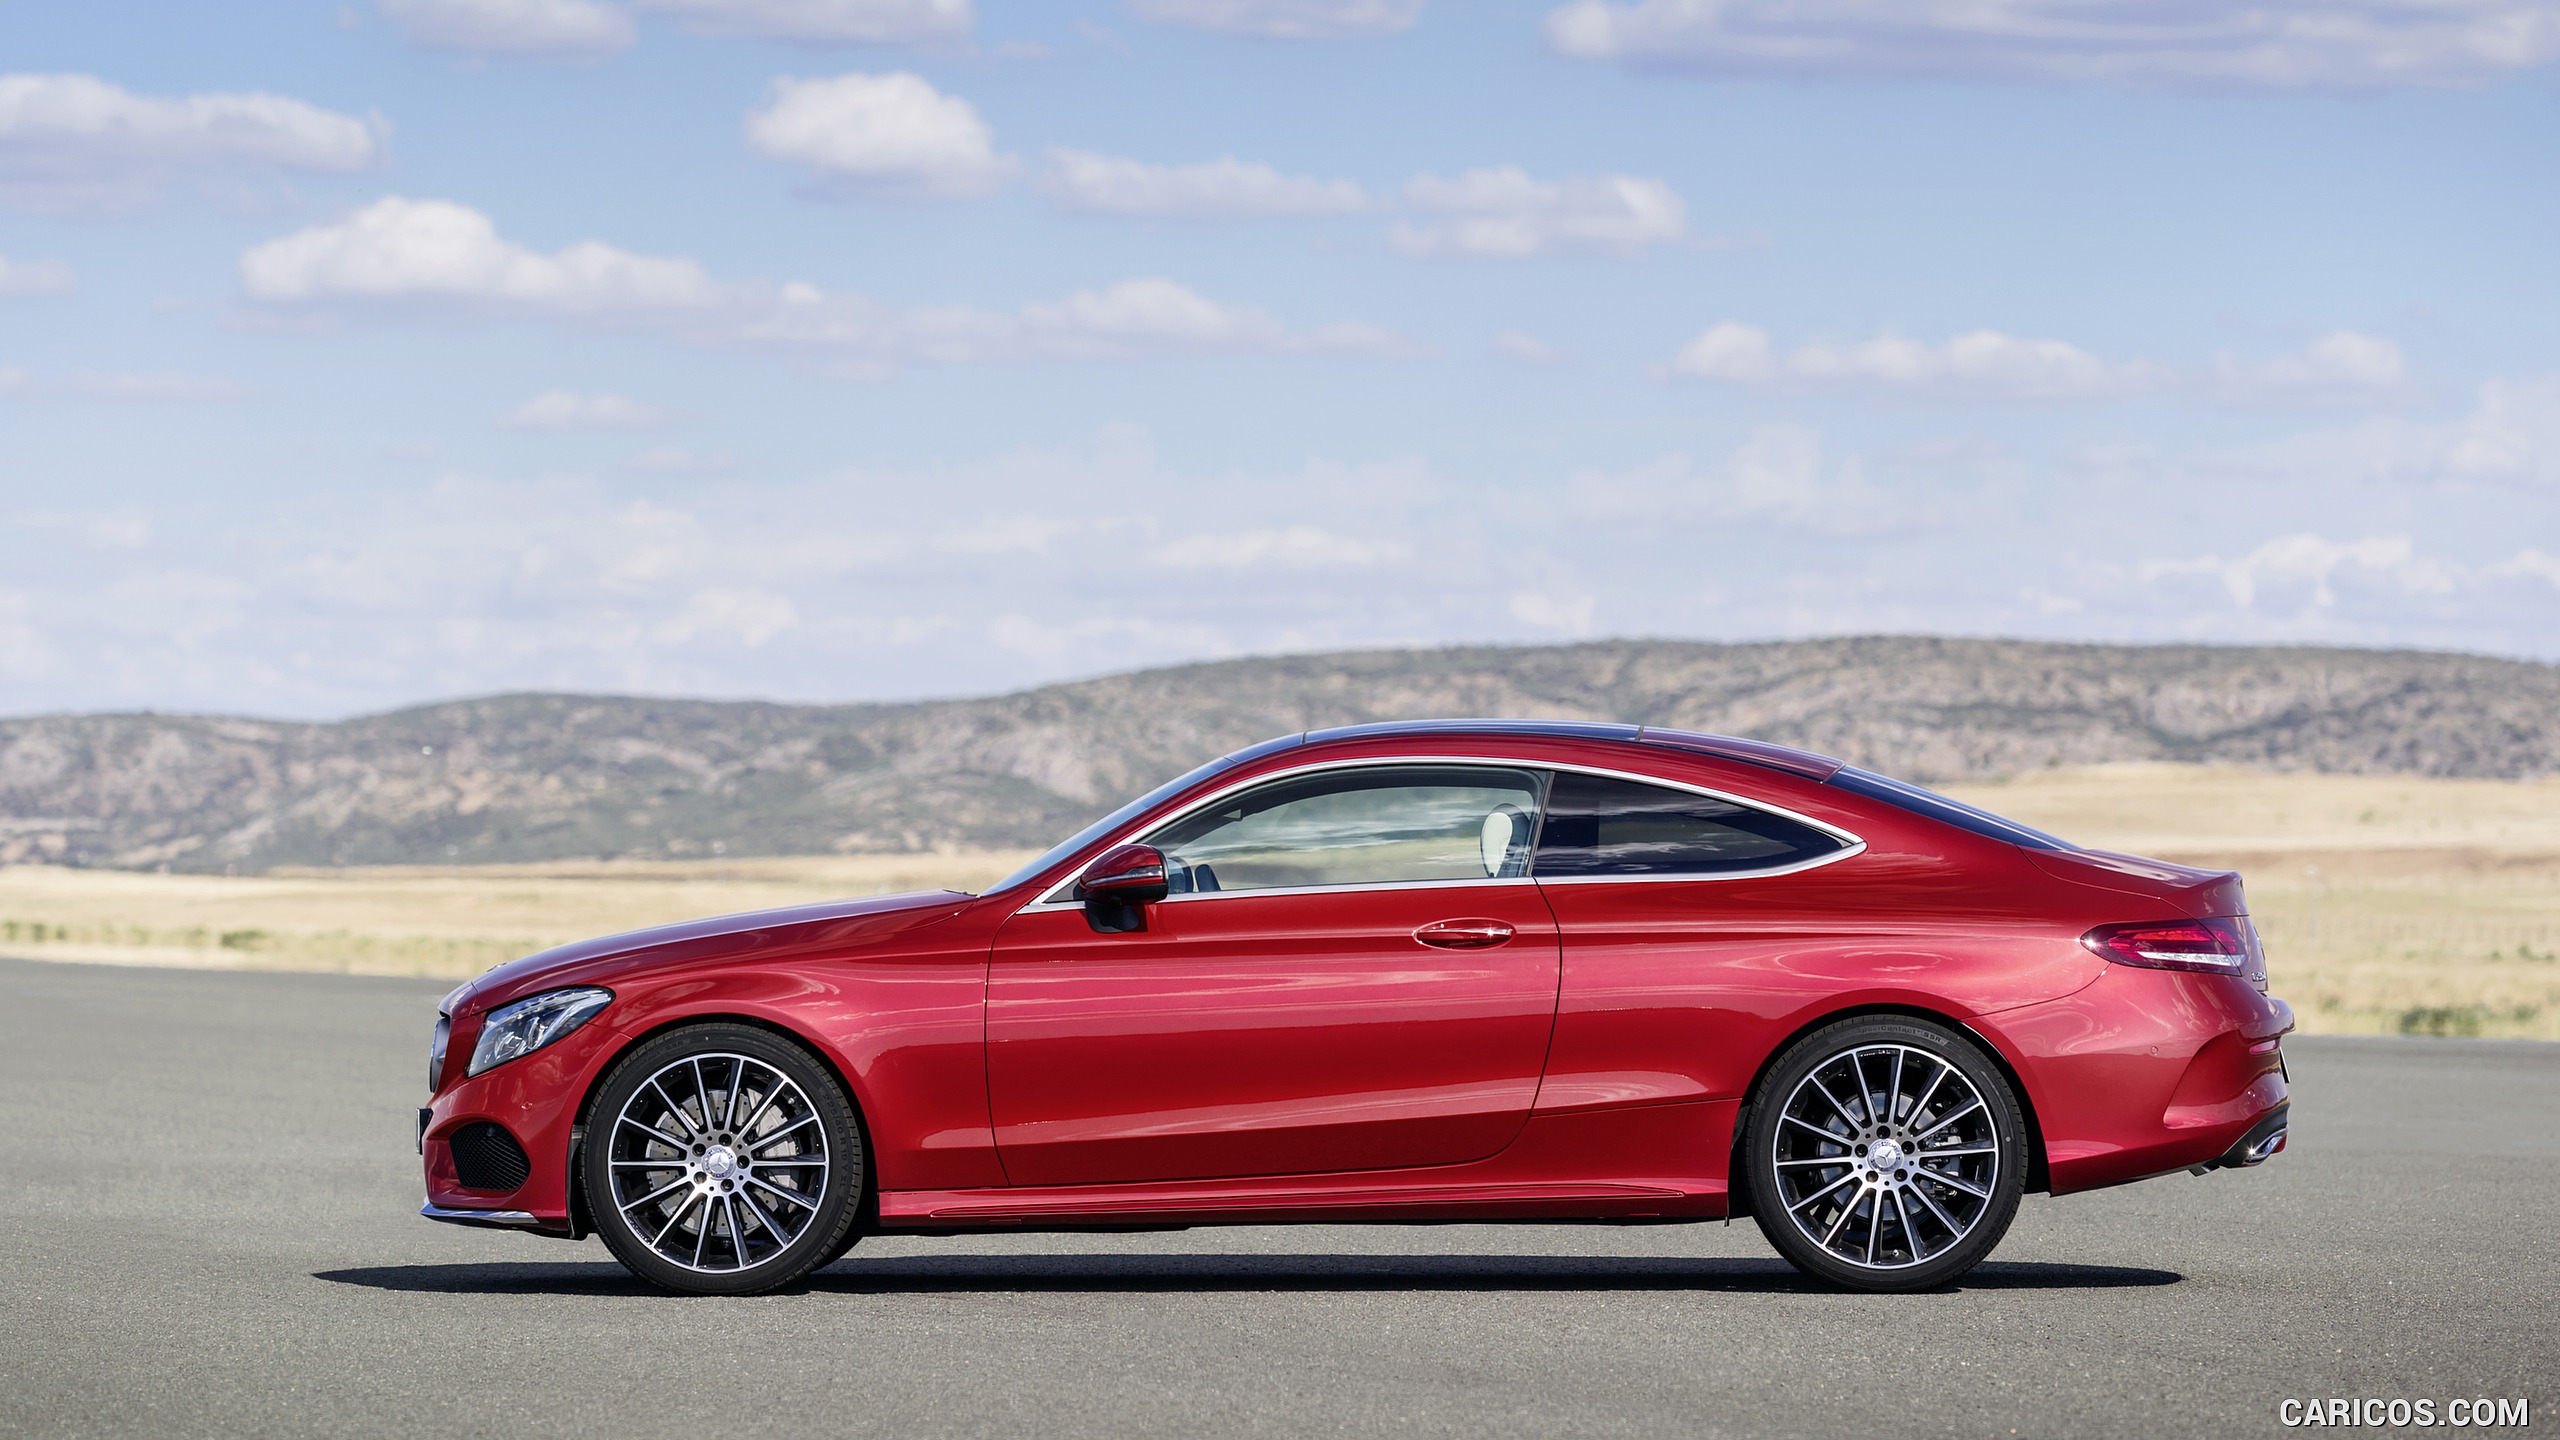 2017 Mercedes-Benz C-Class Coupe C250 d 4MATIC (Hyacinth Red) - , #27 of 210